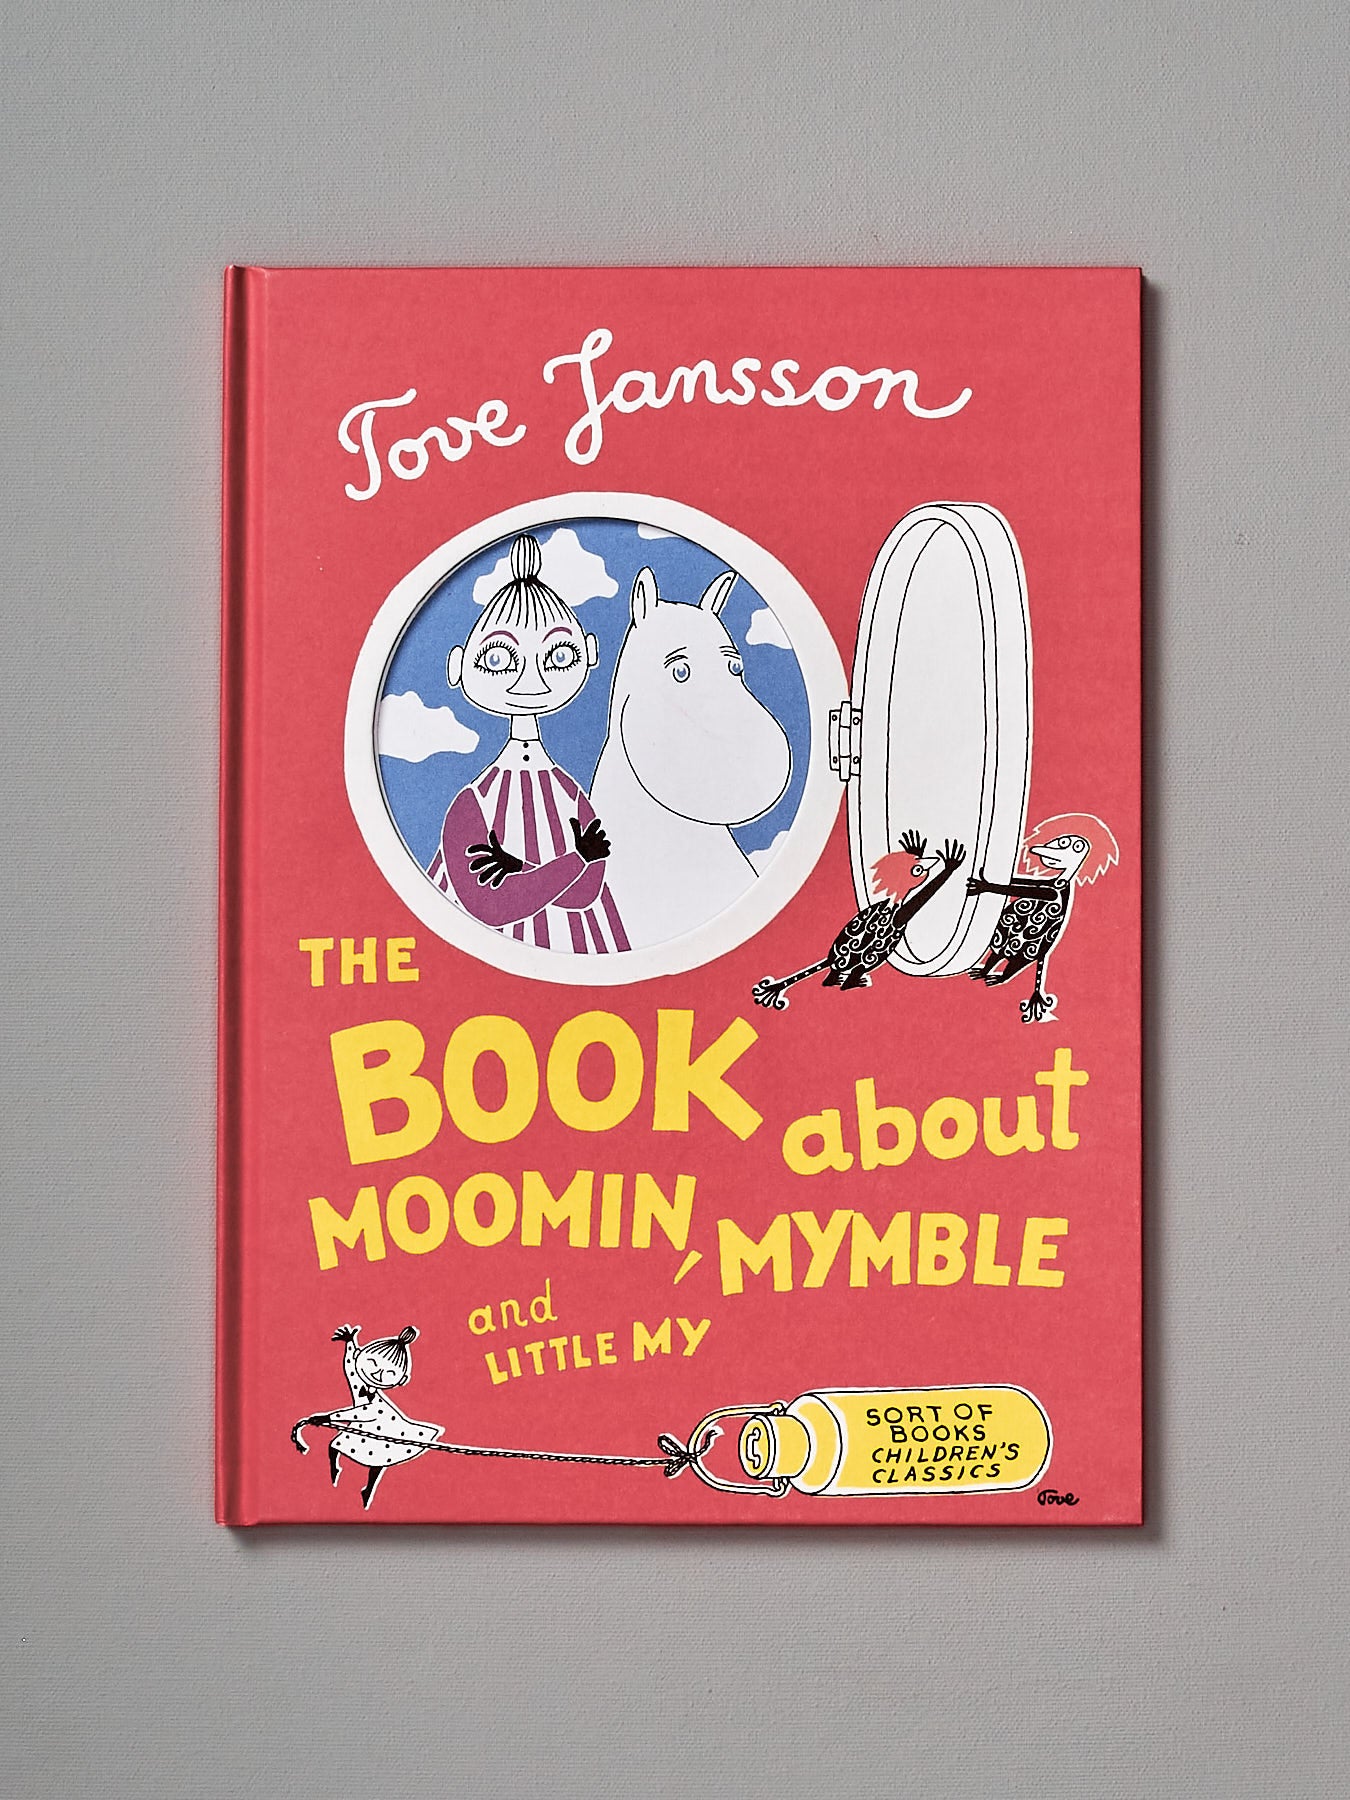 The Tove Jansson book about Moomin's Little Myble.